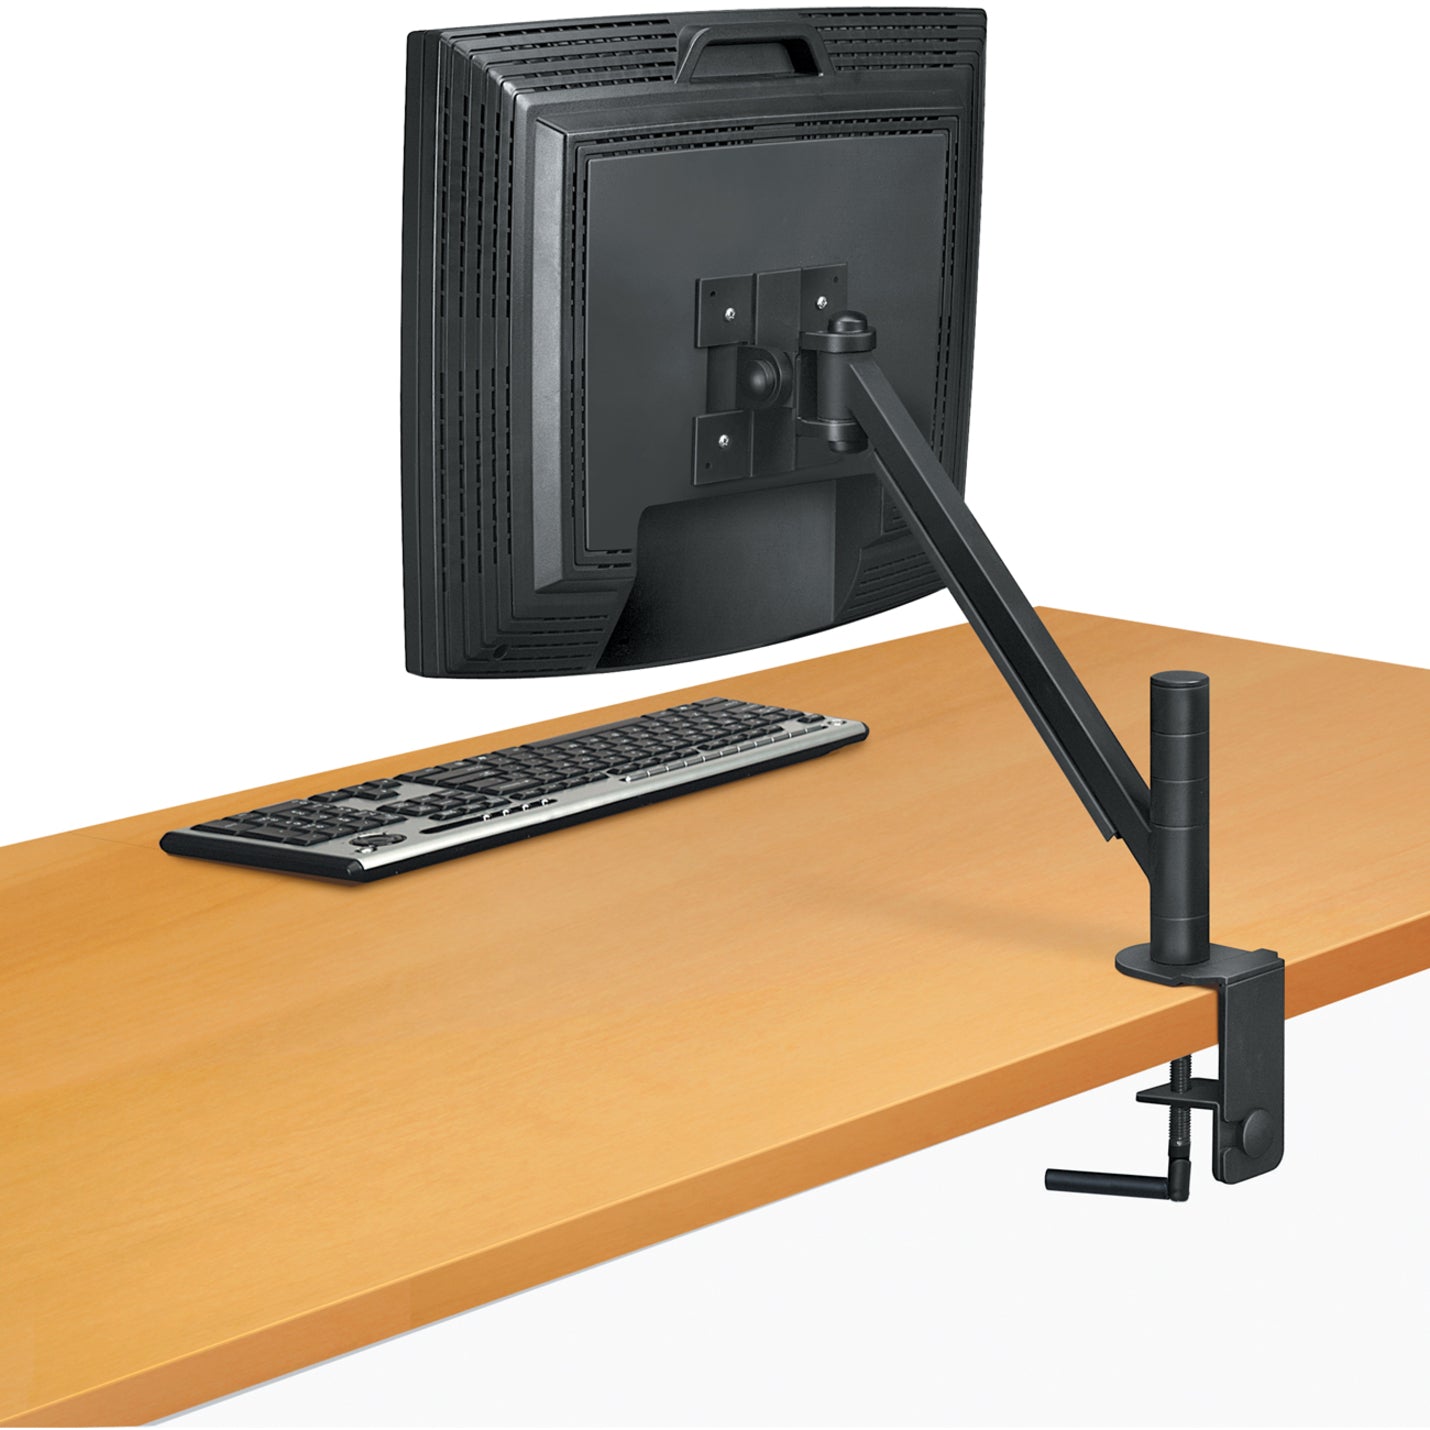 Fellowes 8038201 Designer Suites Flat Panel Monitor Arm, Adjustable Viewing Angle, Cable Management